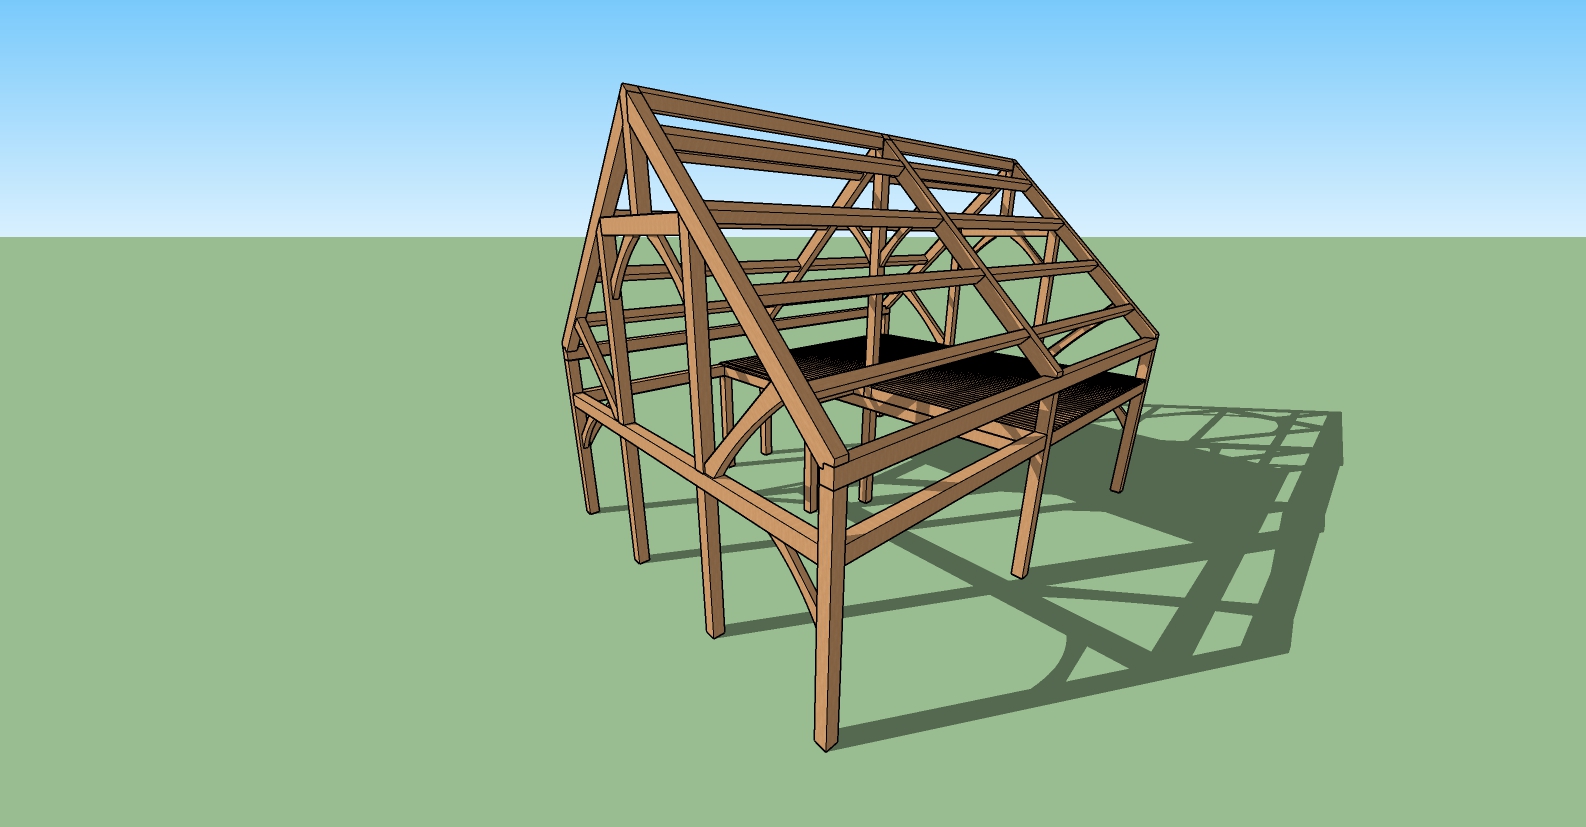 A 3 d image of the structure in progress.